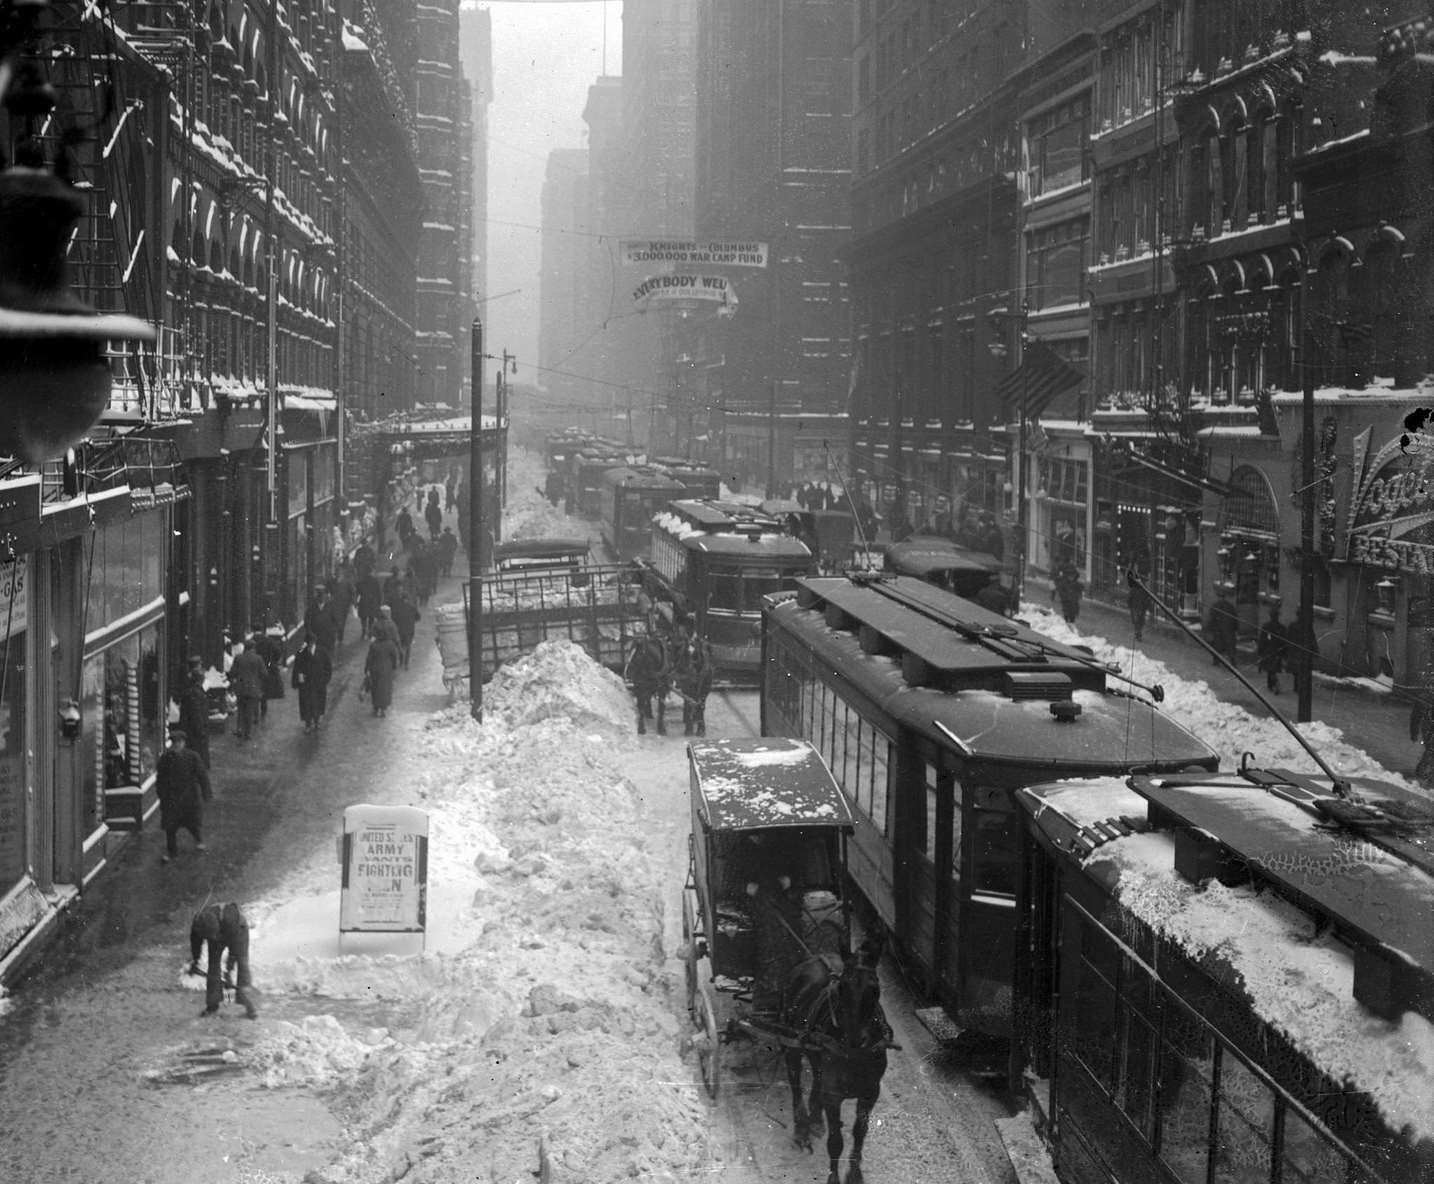 West Madison Street looking from North Wells Street, with Vogelsang's Restaurant at 173-181 West Madison visible on the extreme right, during a snowstorm in the Loop community, Chicago, Illinois, 1918.